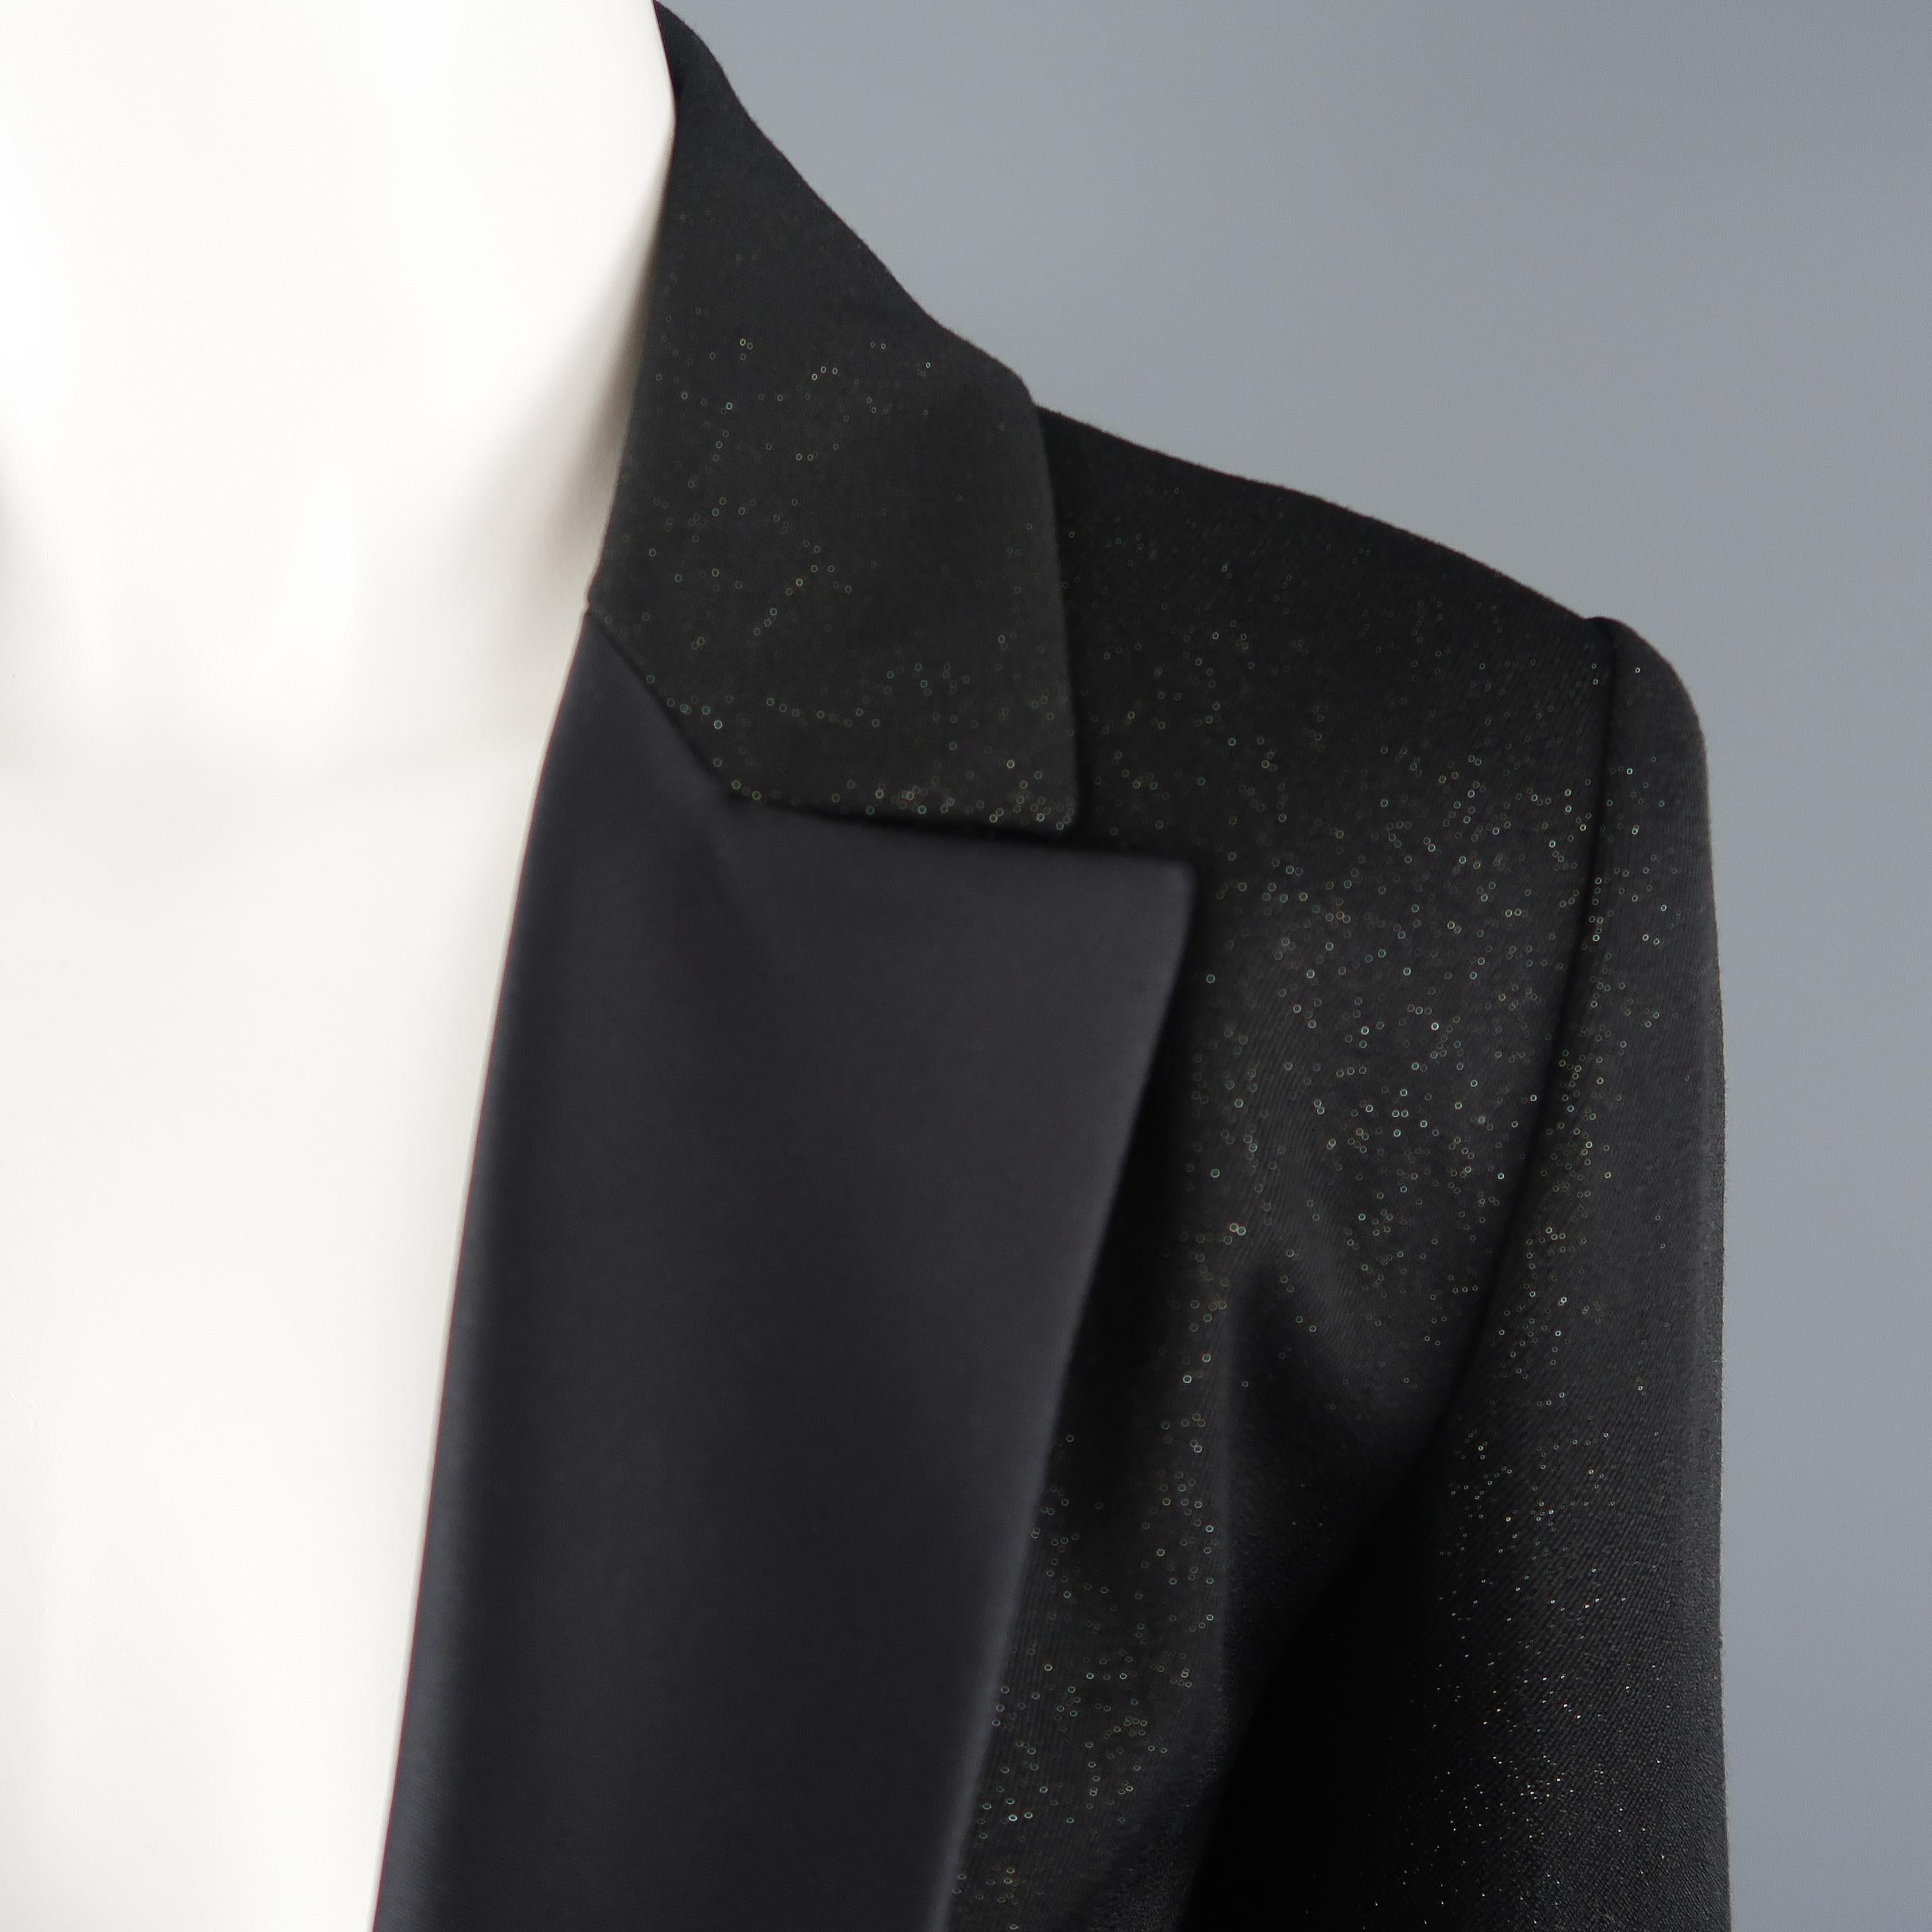 CHANEL tuxedo style jacket comes in a black wool blend twill with an all over glitter sheen and features a half silk satin peak lapel, single button front with rhinestone enamel chain closure, and functional button cuffs. Made in France.
 
Excellent